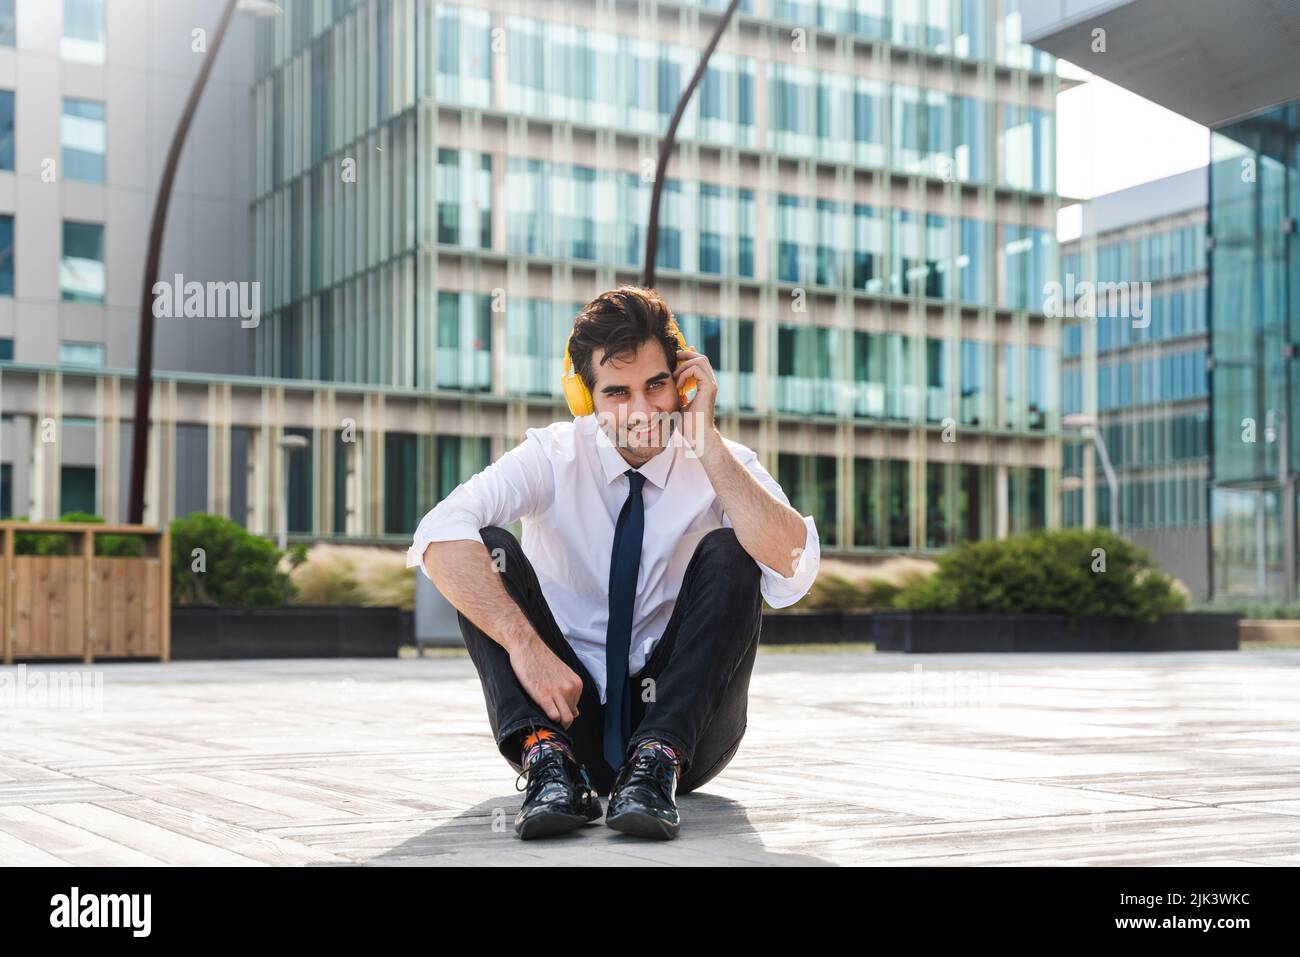 Happy and handsome adult businessman wearing elegant suit sitting on the ground and listening music with headphones to relax Stock Photo